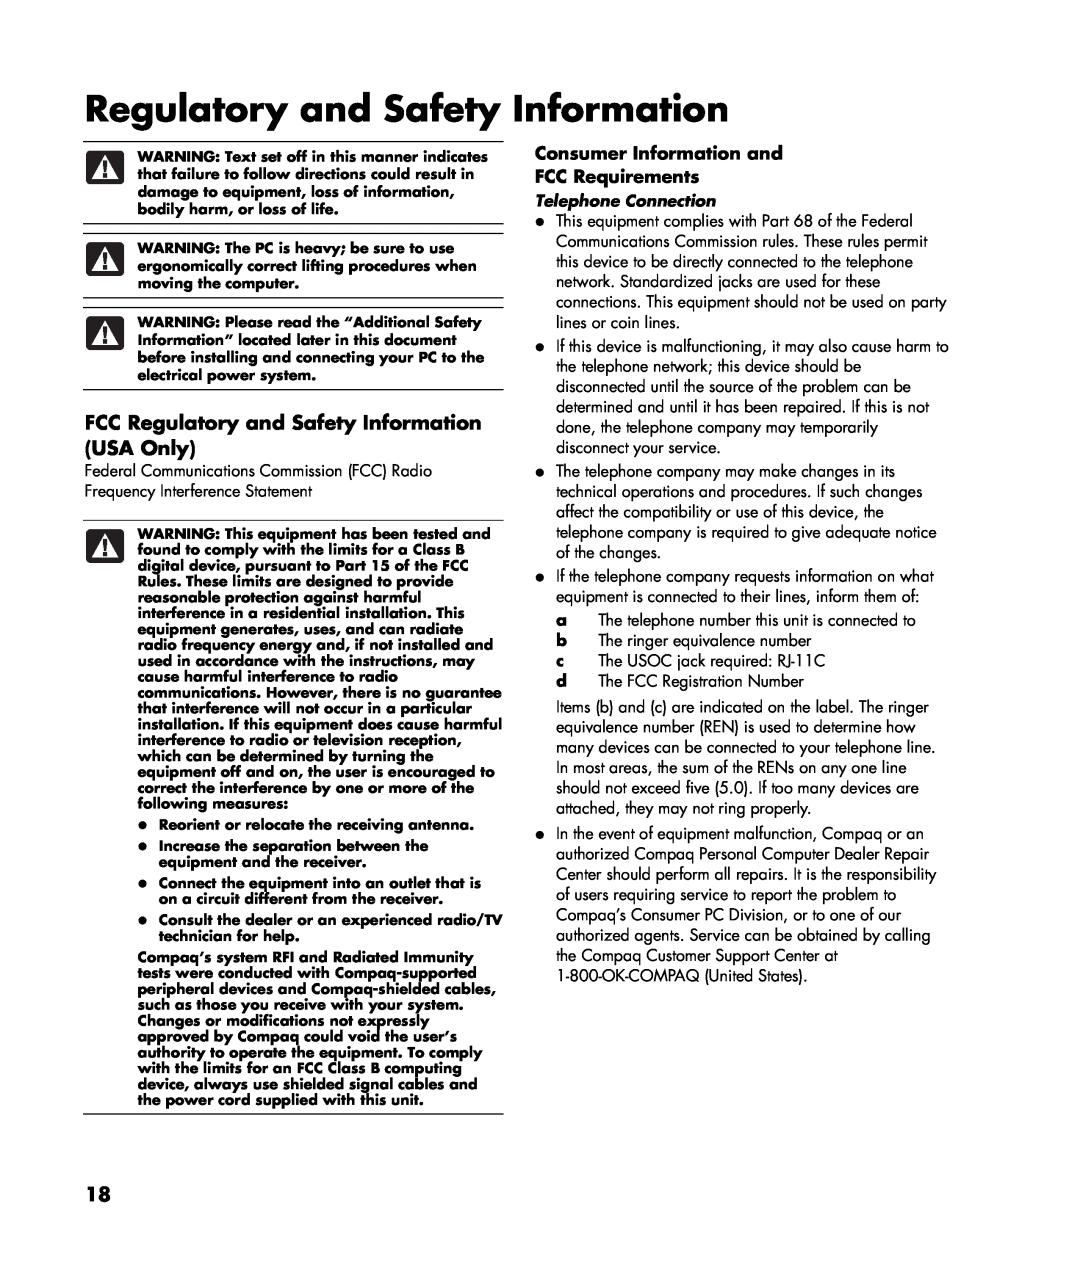 HP SR1010V-2 (PJ687AV) manual FCC Regulatory and Safety Information USA Only, Consumer Information and FCC Requirements 